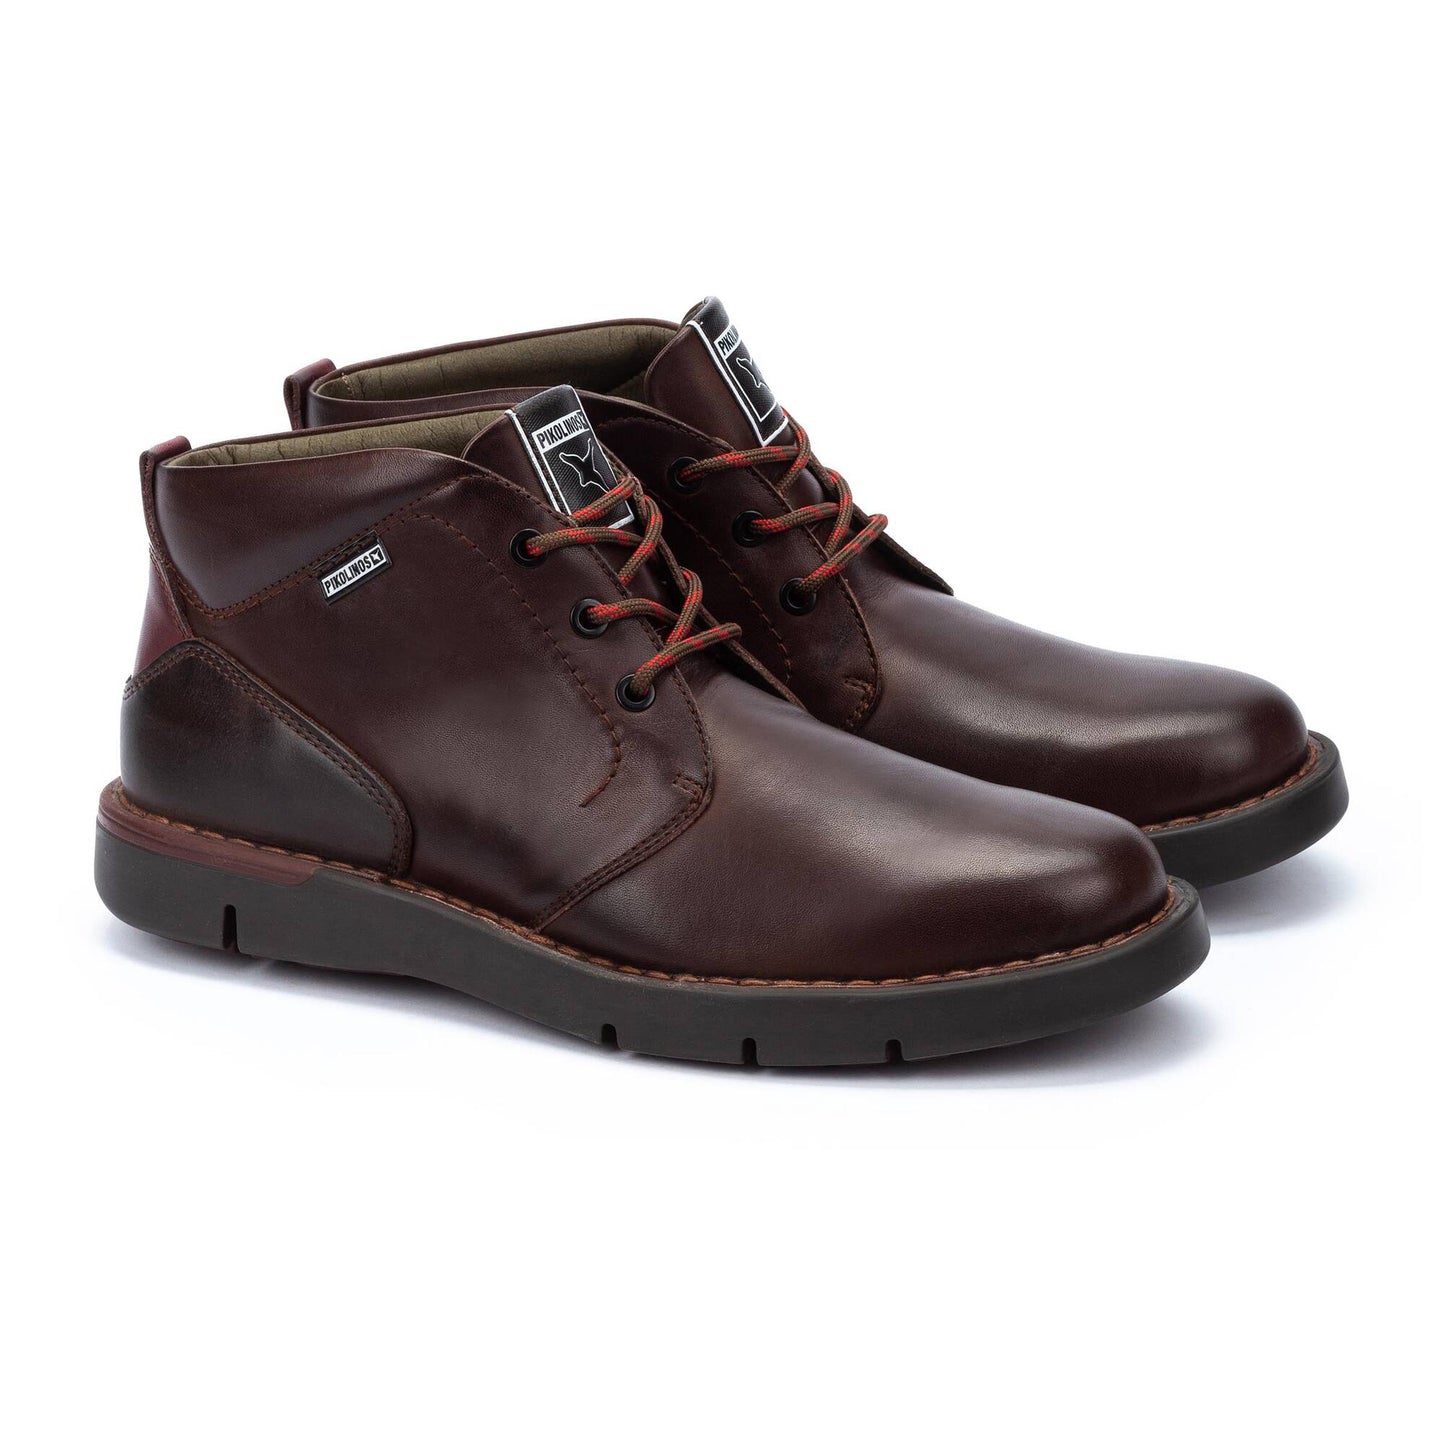 Pikolinos Men's Tolosa M7N-8177C1 Leather Casual Boots Olmo Brown